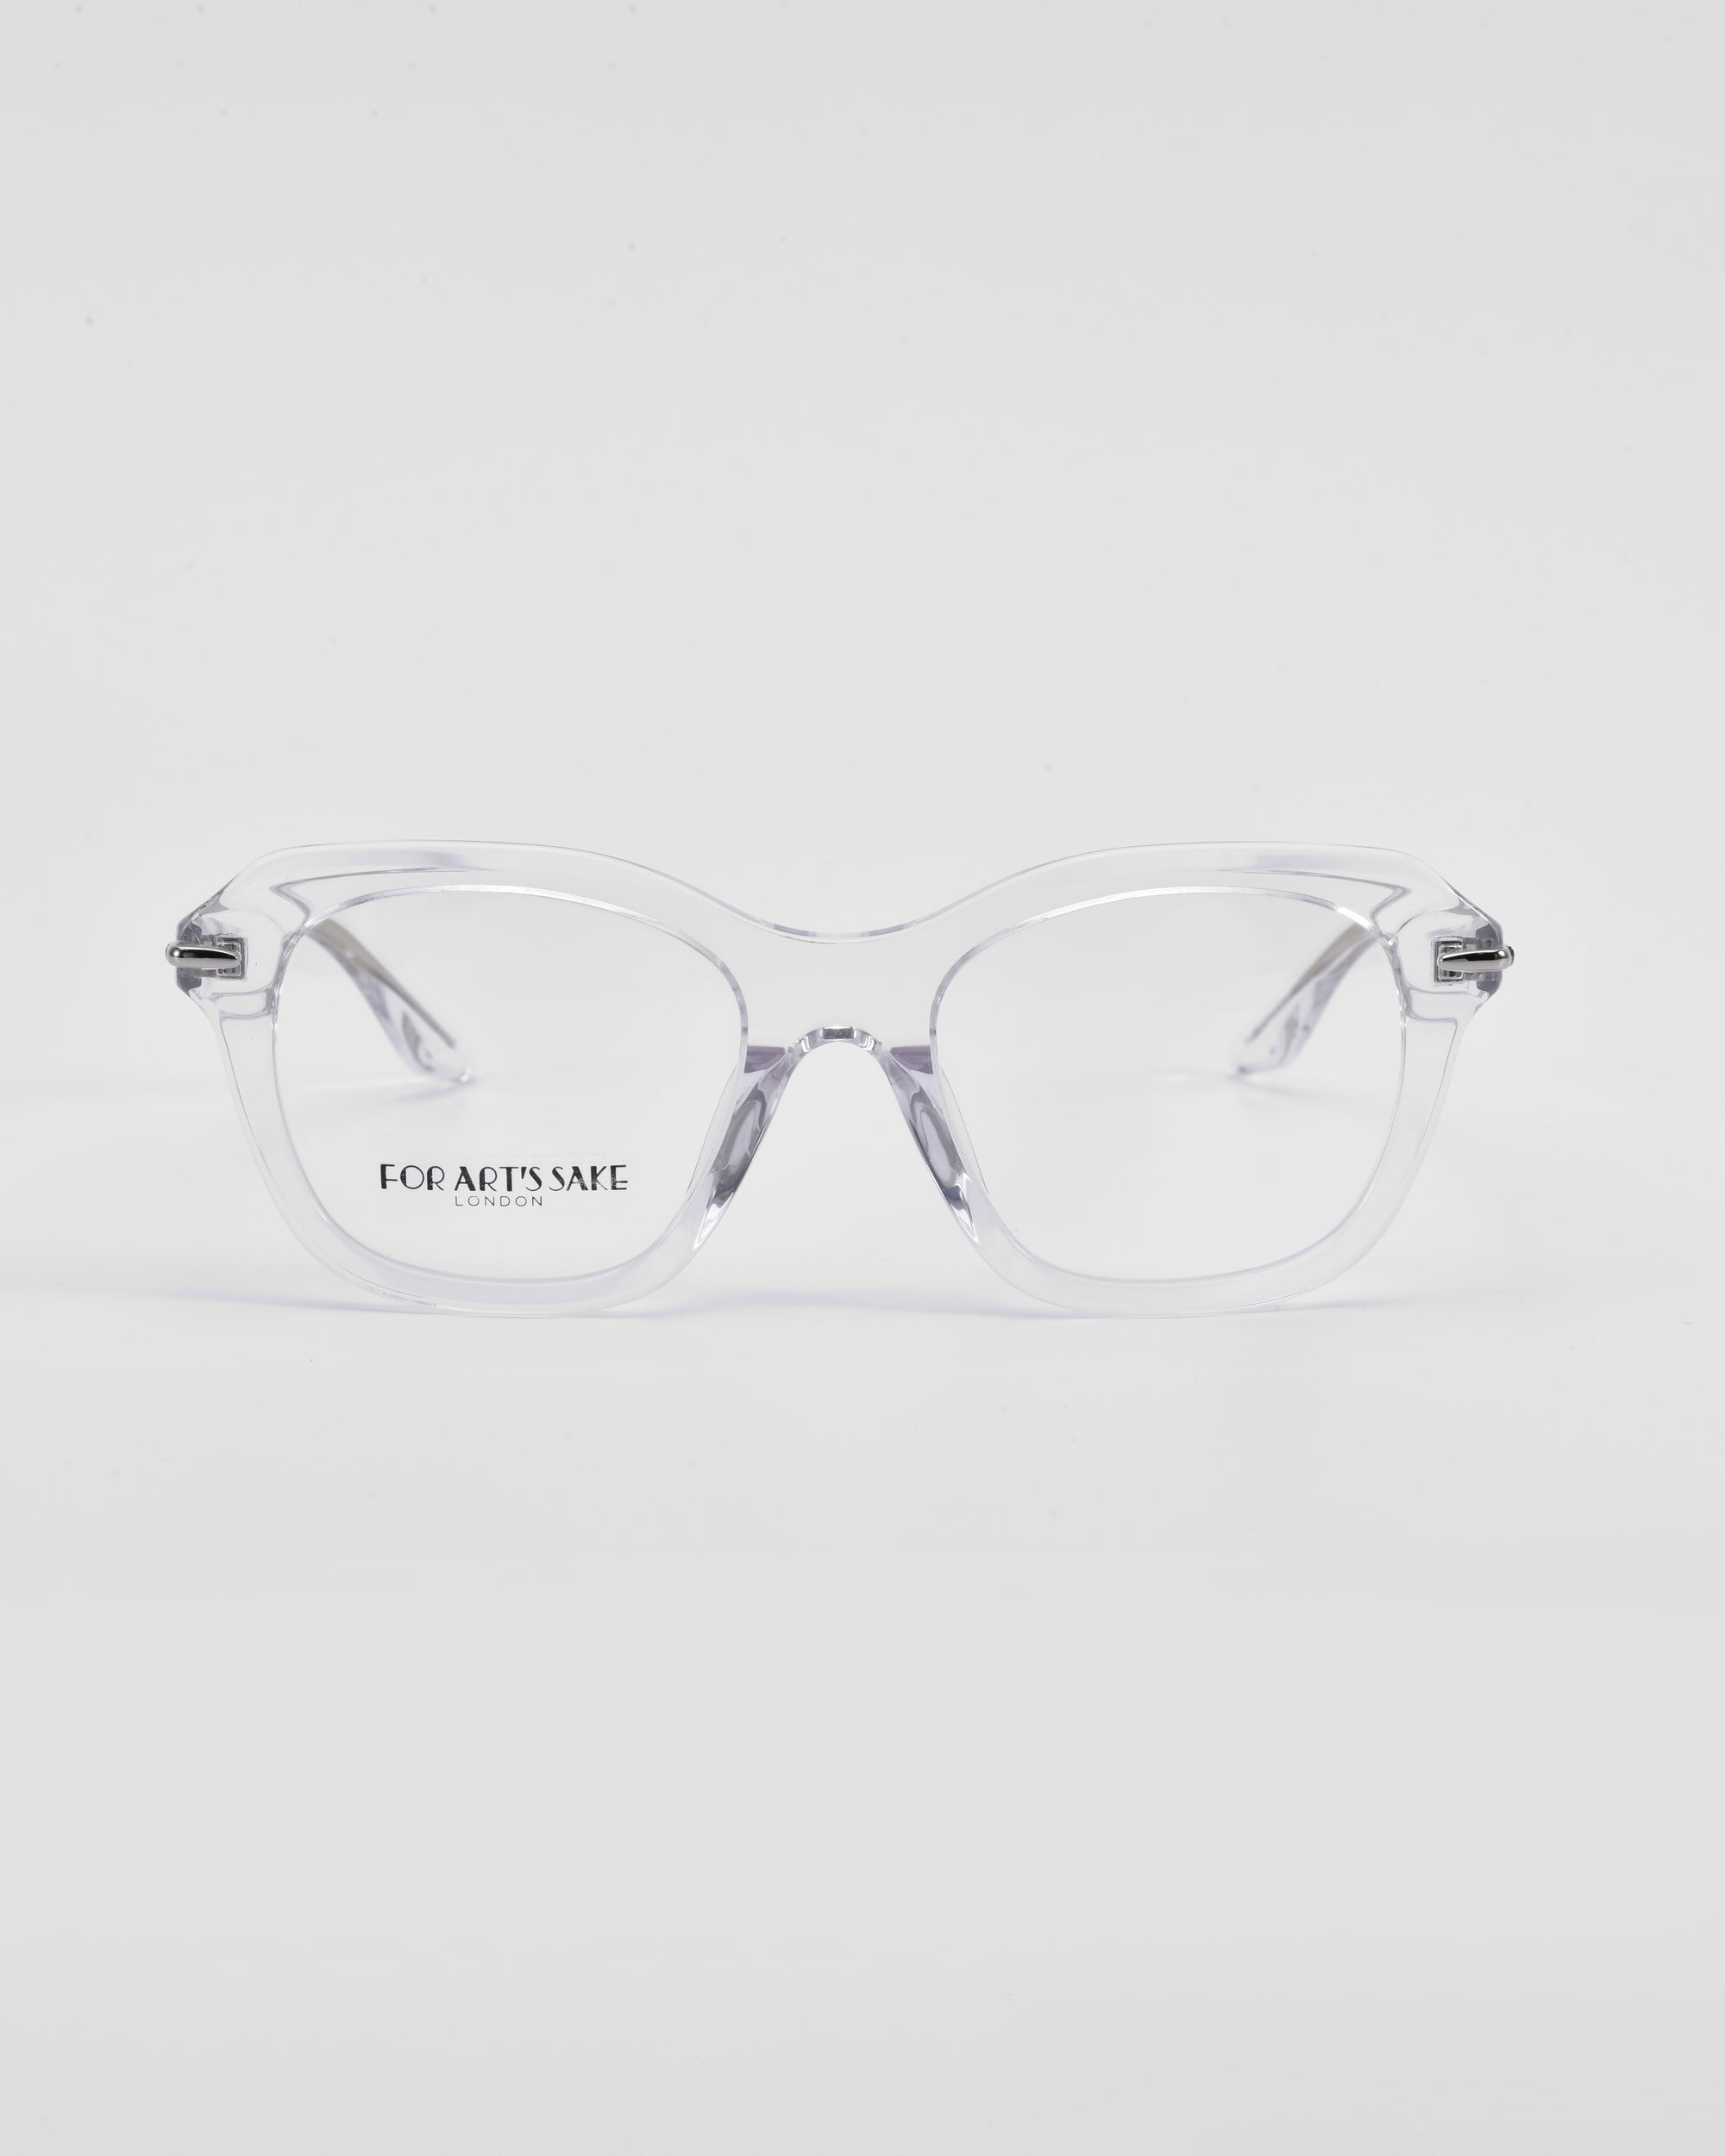 A pair of clear eyeglasses with transparent frames and a hint of a cat-eye silhouette rest on a white surface. The lenses have the text "For Art's Sake® Helene" printed on the left side. The design is minimalist and modern, with slightly thick frames and a subtle, elegant appearance.